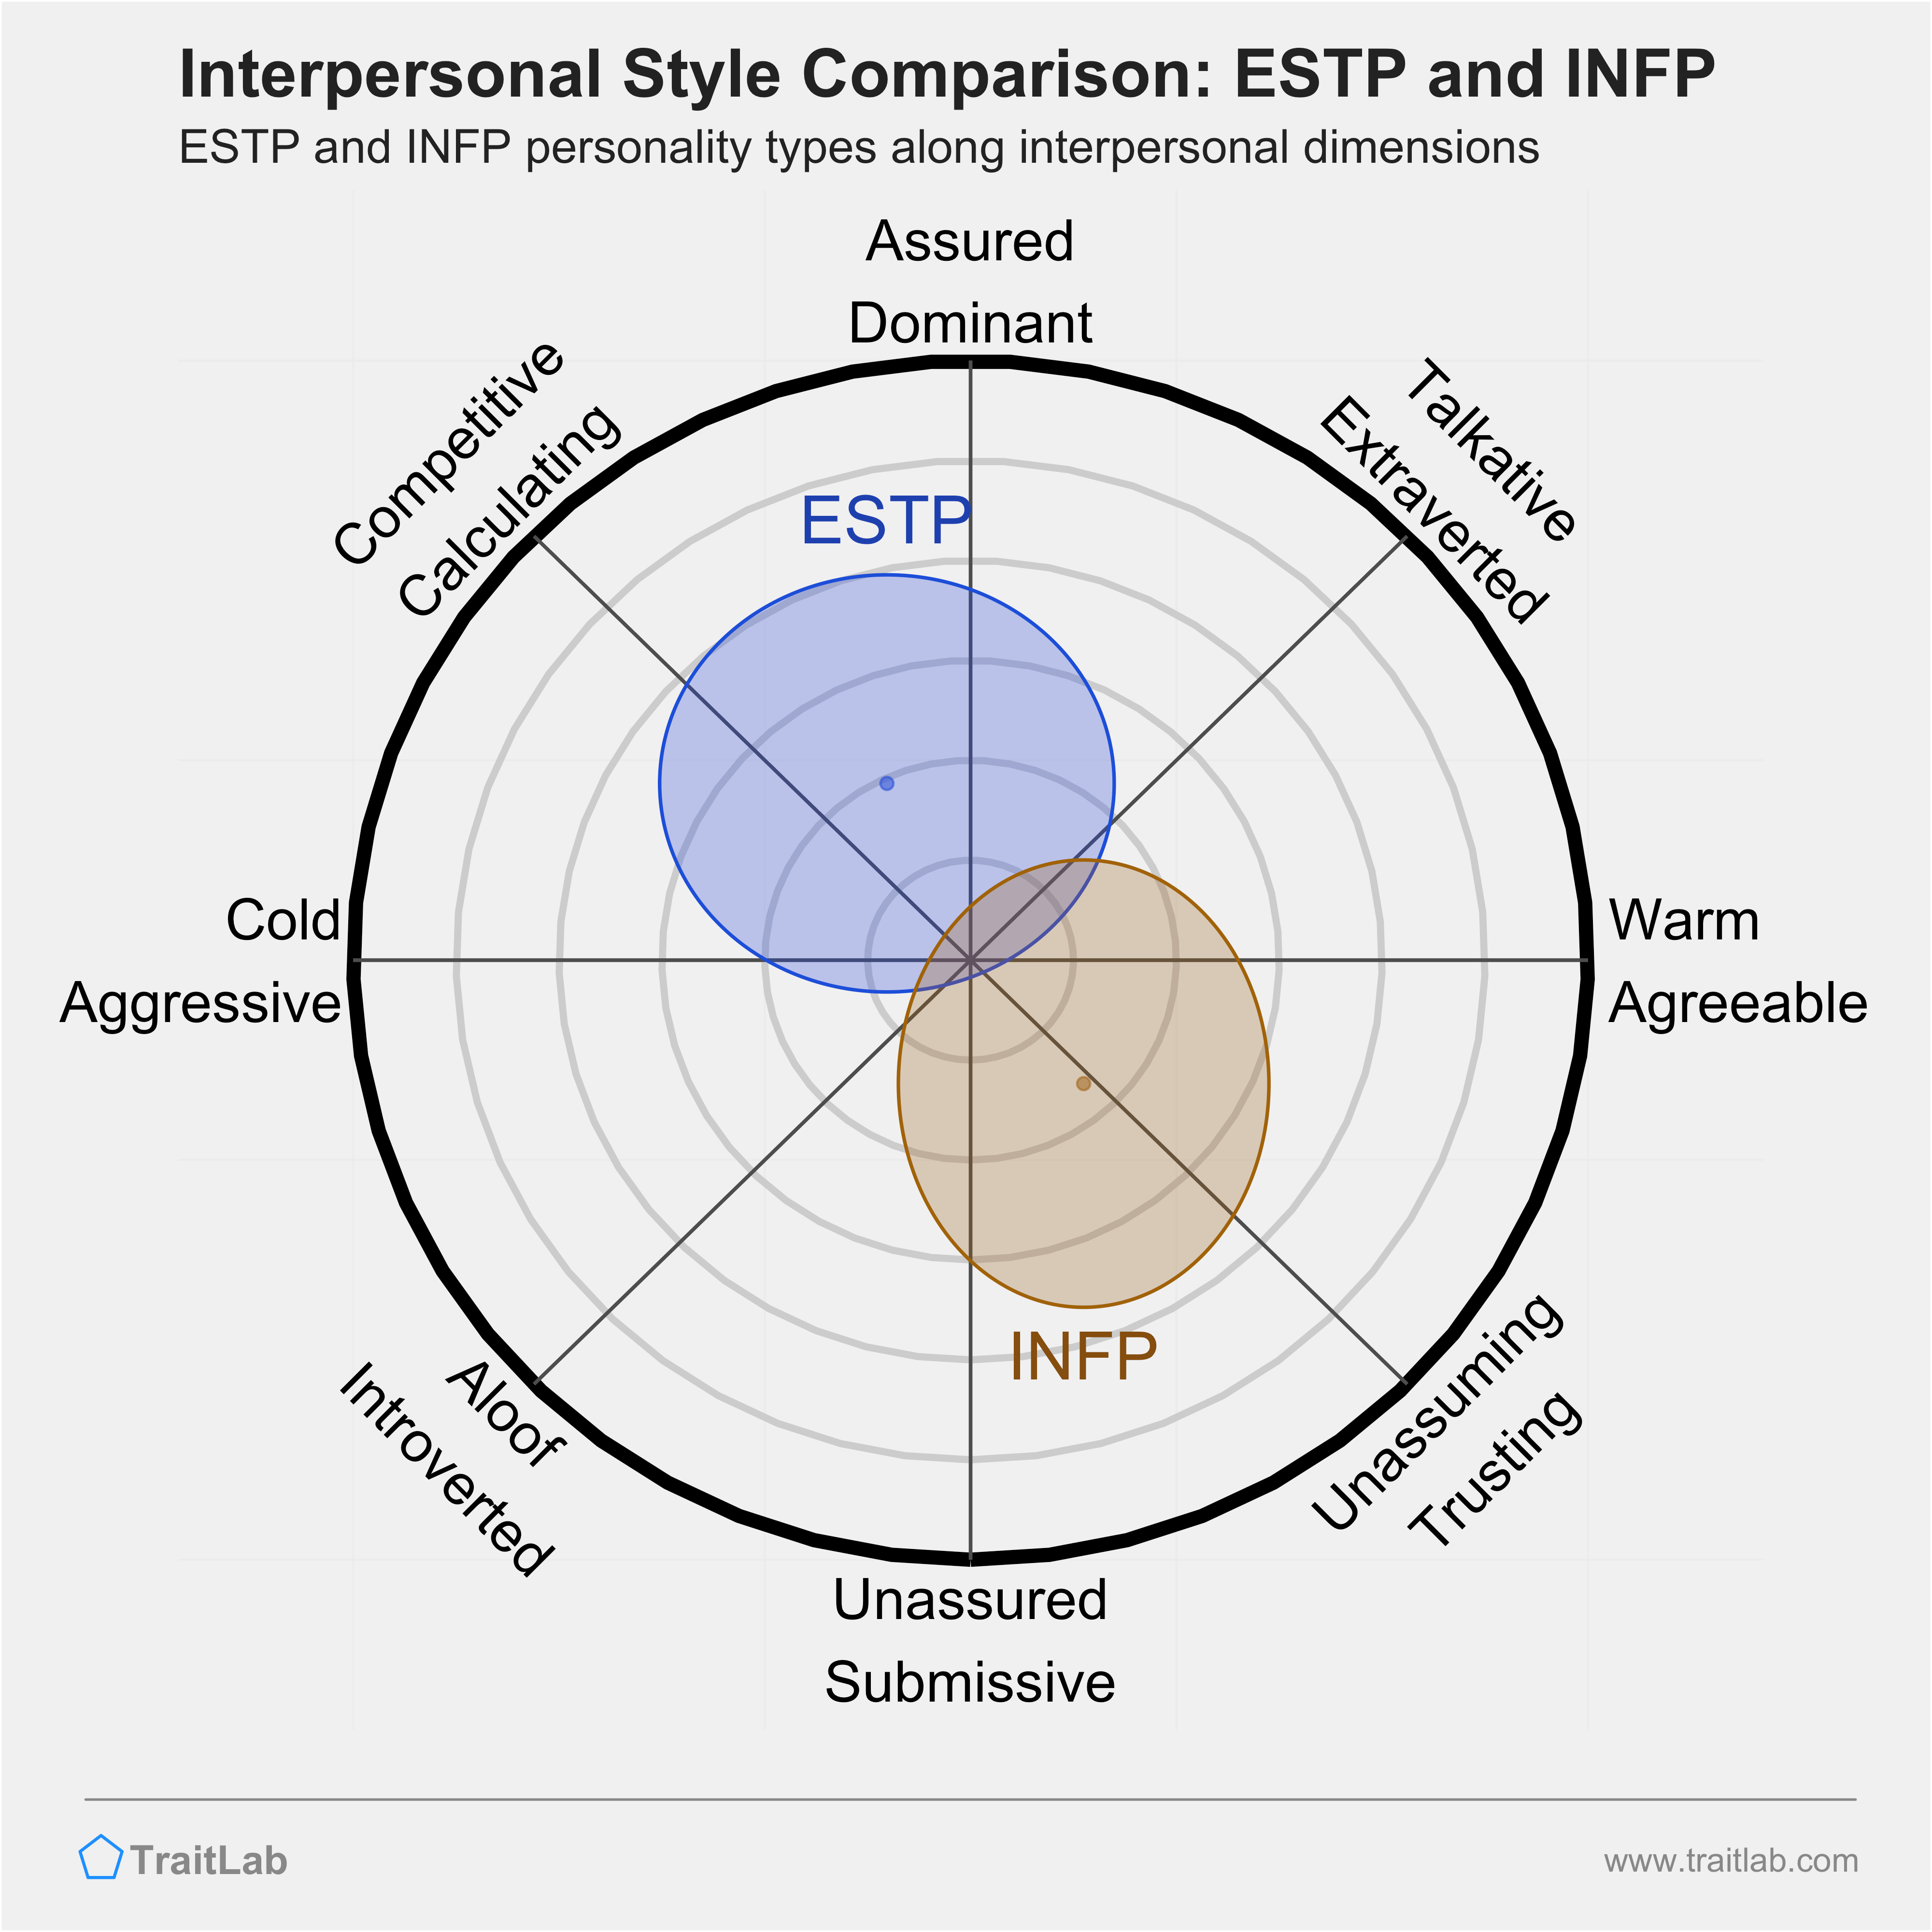 ESTP and INFP comparison across interpersonal dimensions